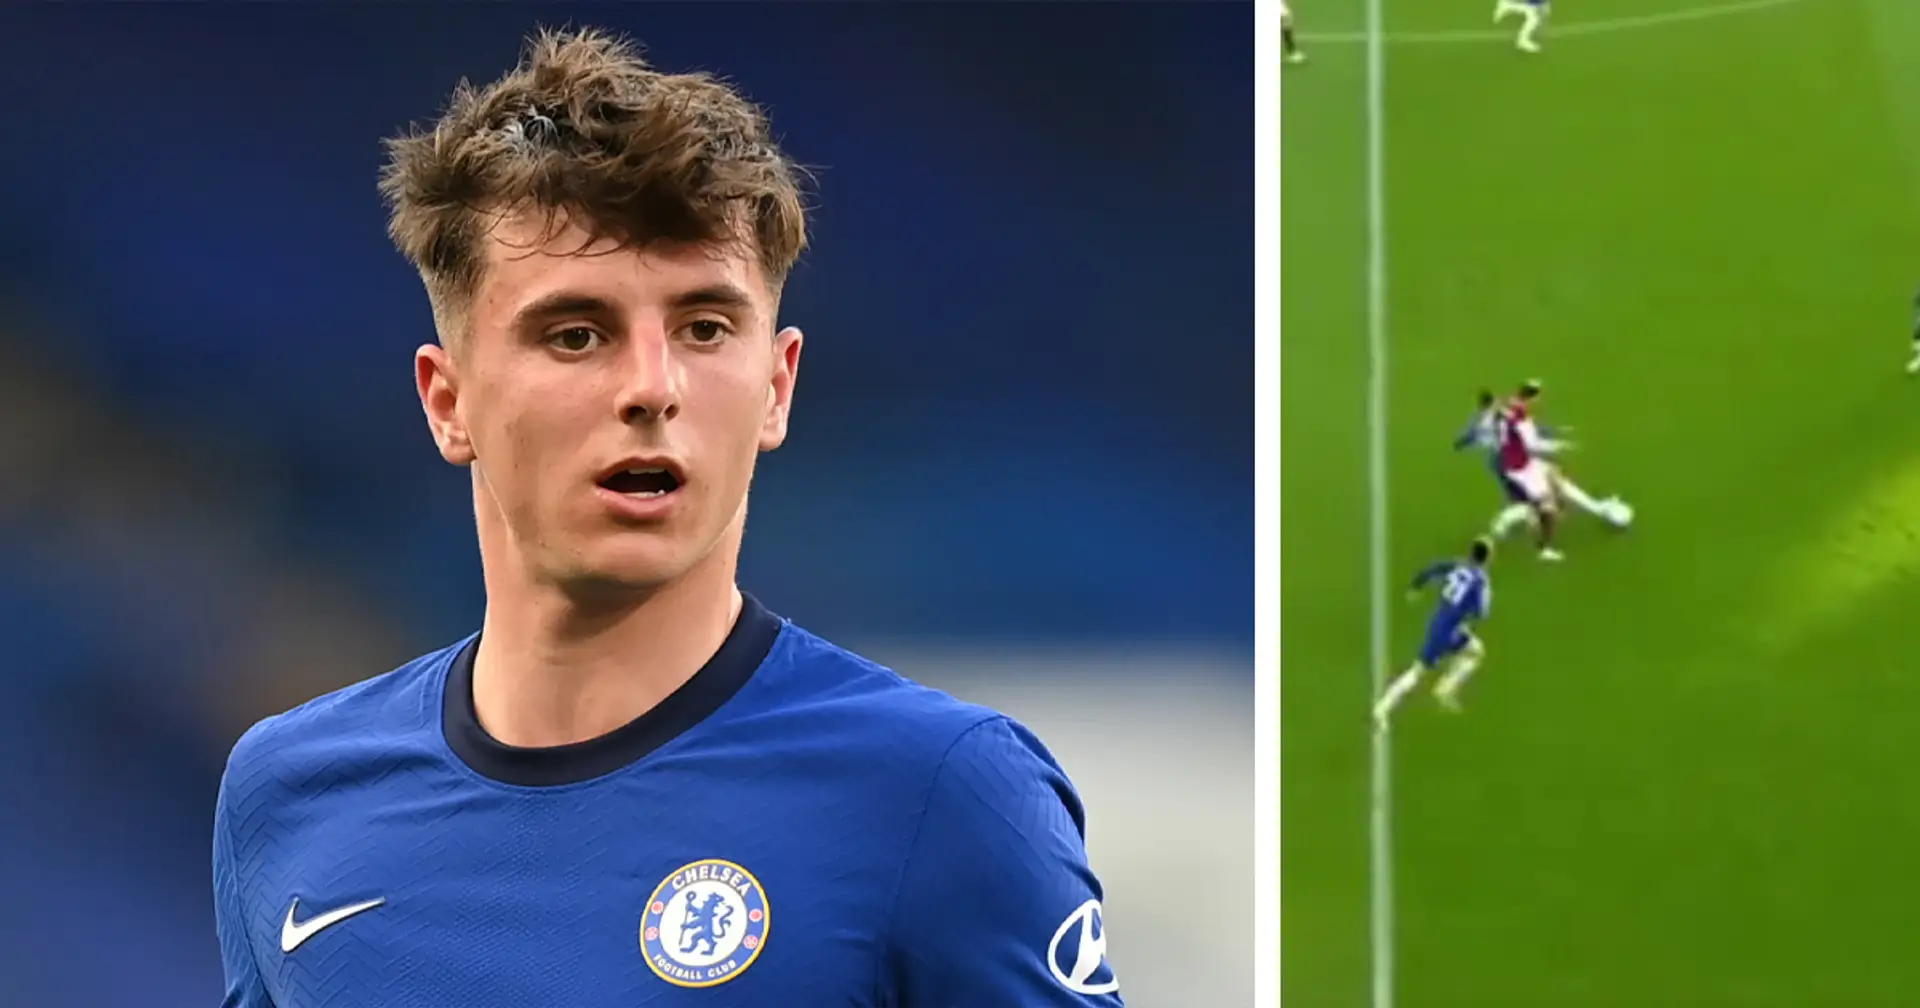 One under-the-radar episode from Burnley win shows why Mason Mount deserves to start for Chelsea